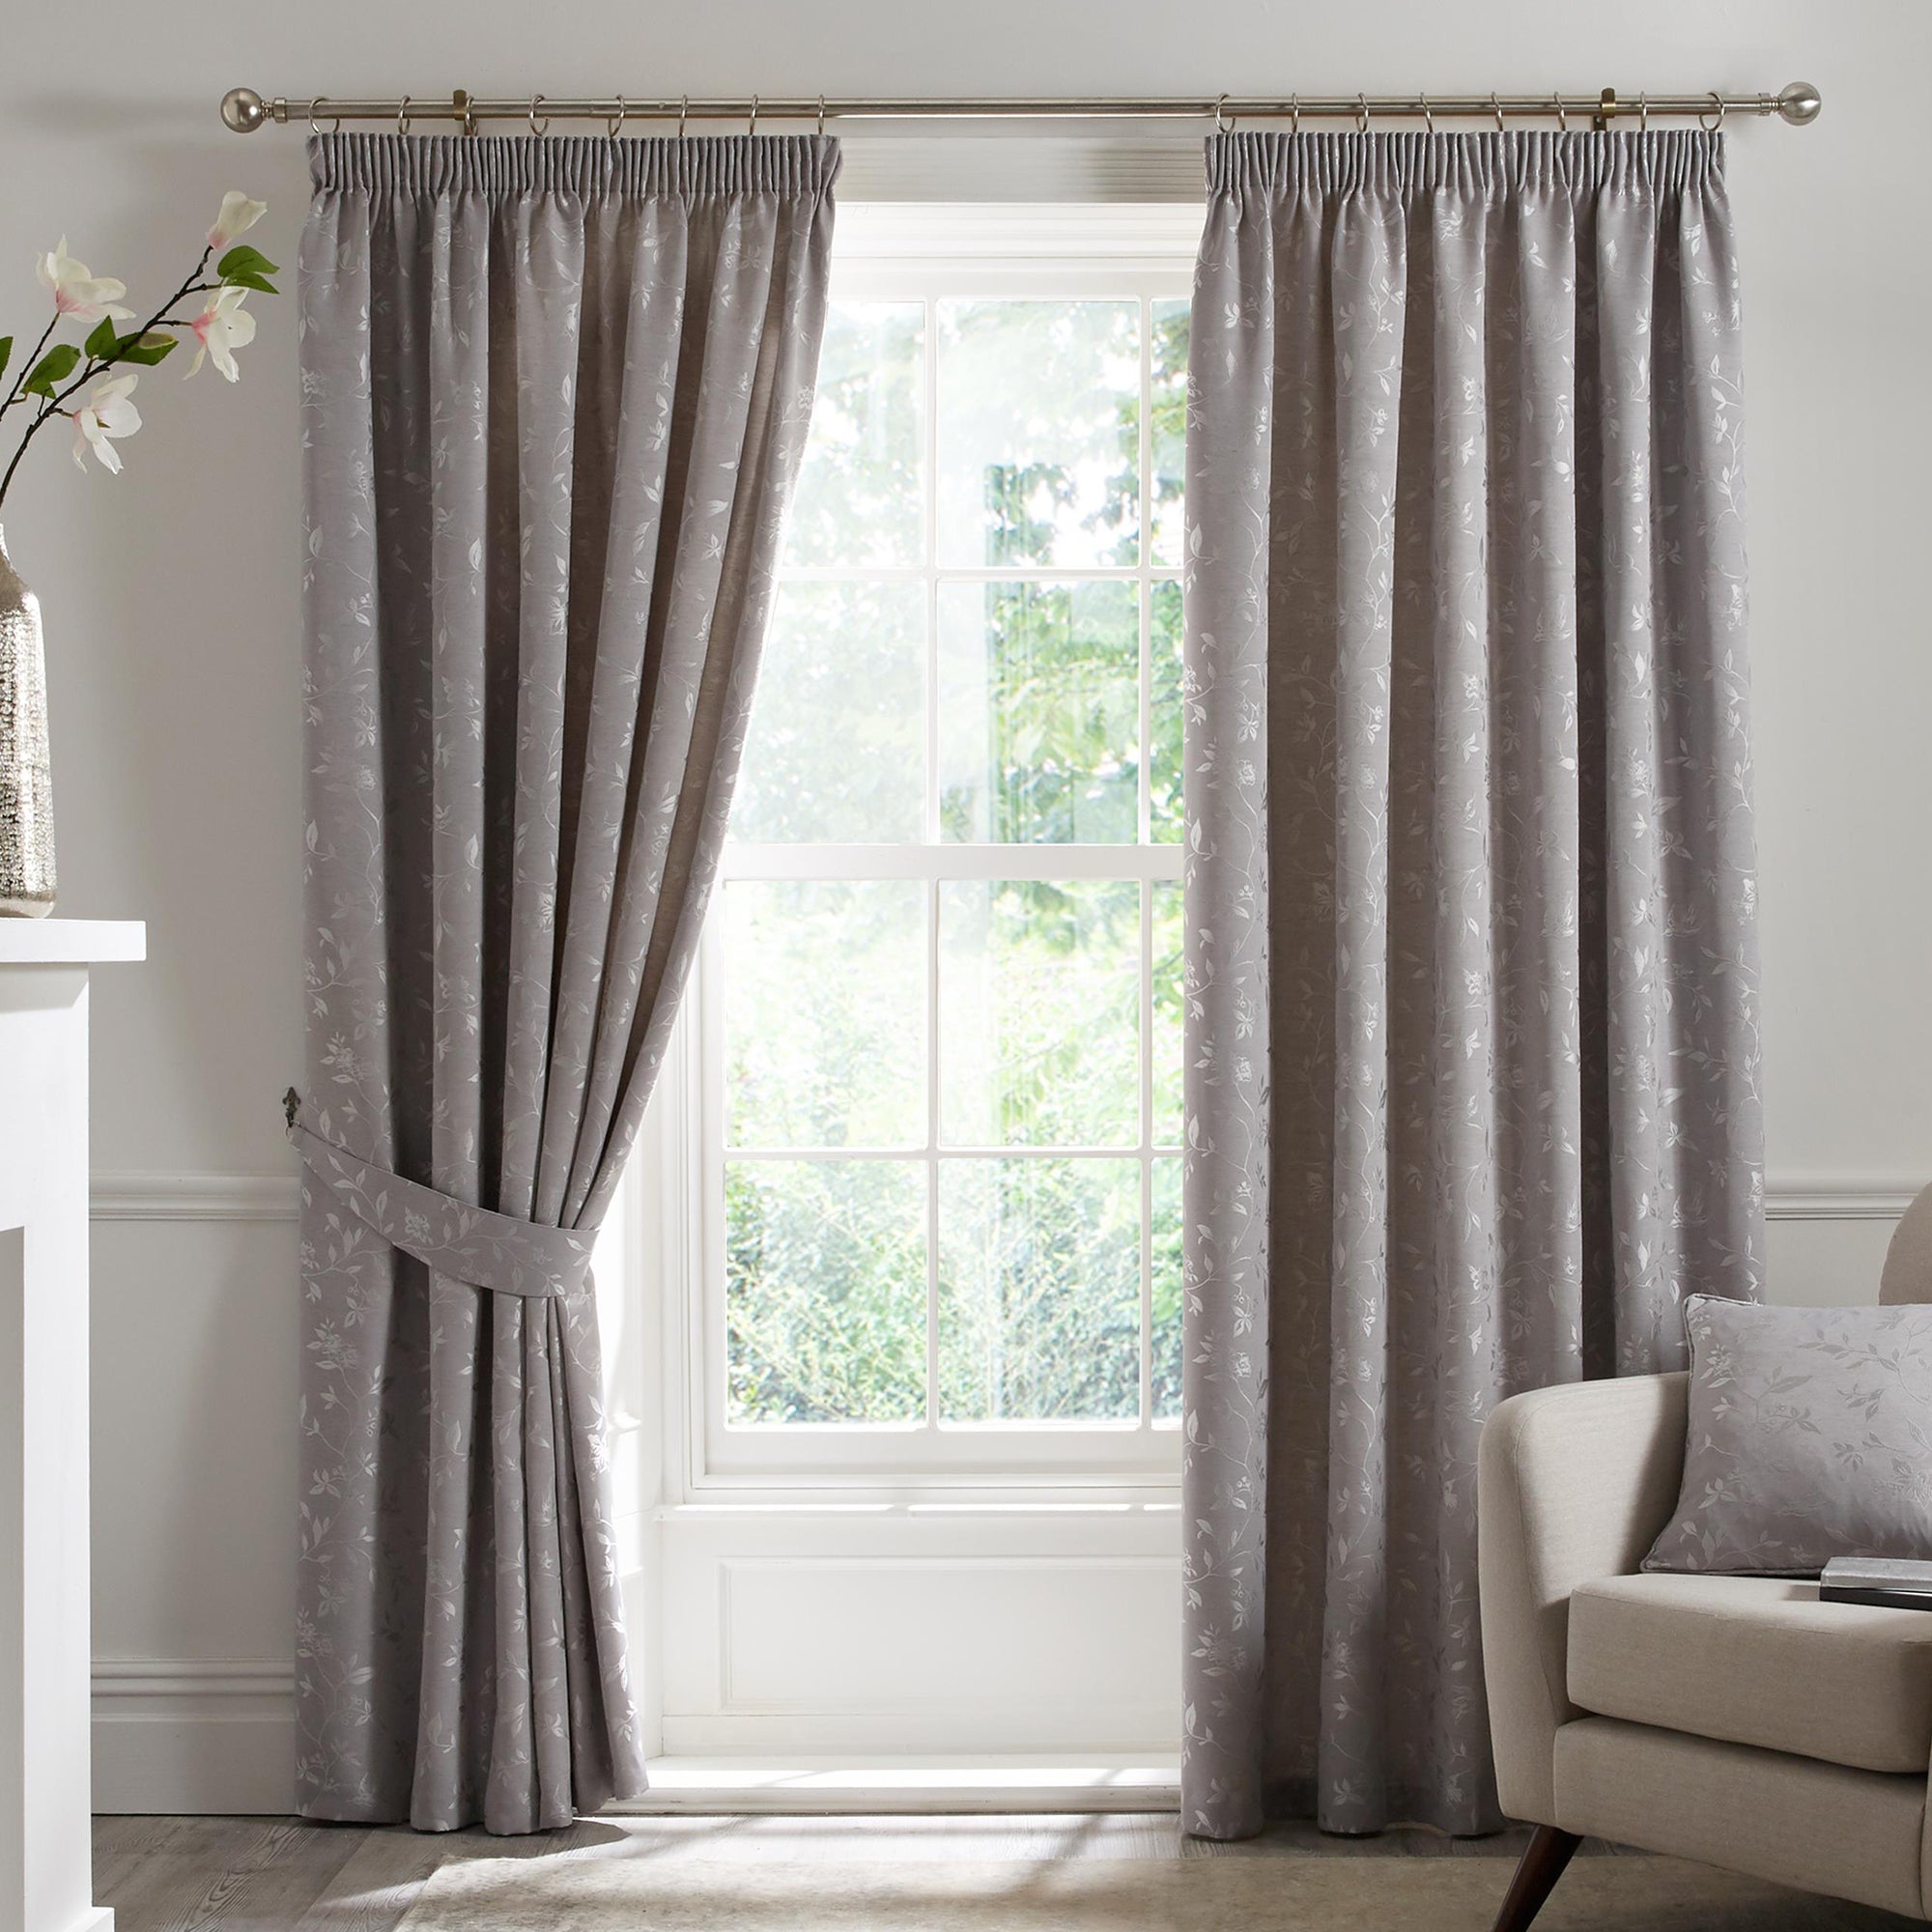 Bird Trail - Jacquard Pair of Pencil Pleat Curtains in Grey - By Curtina